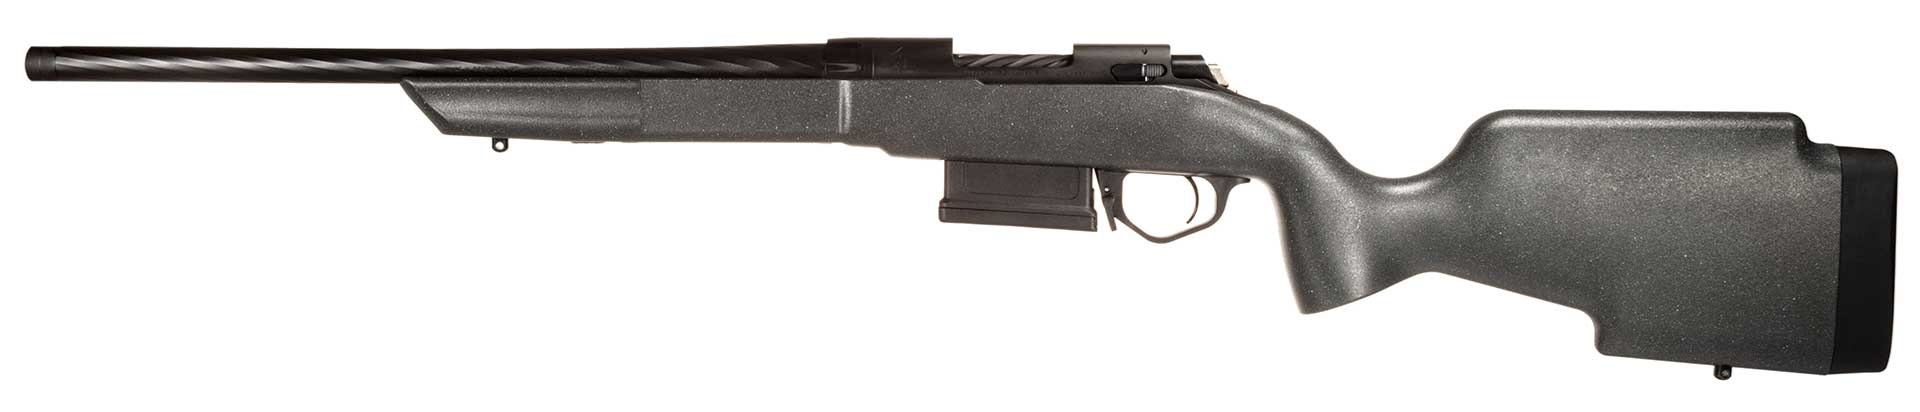 Left side of the Taurus Expedition bolt-action rifle.